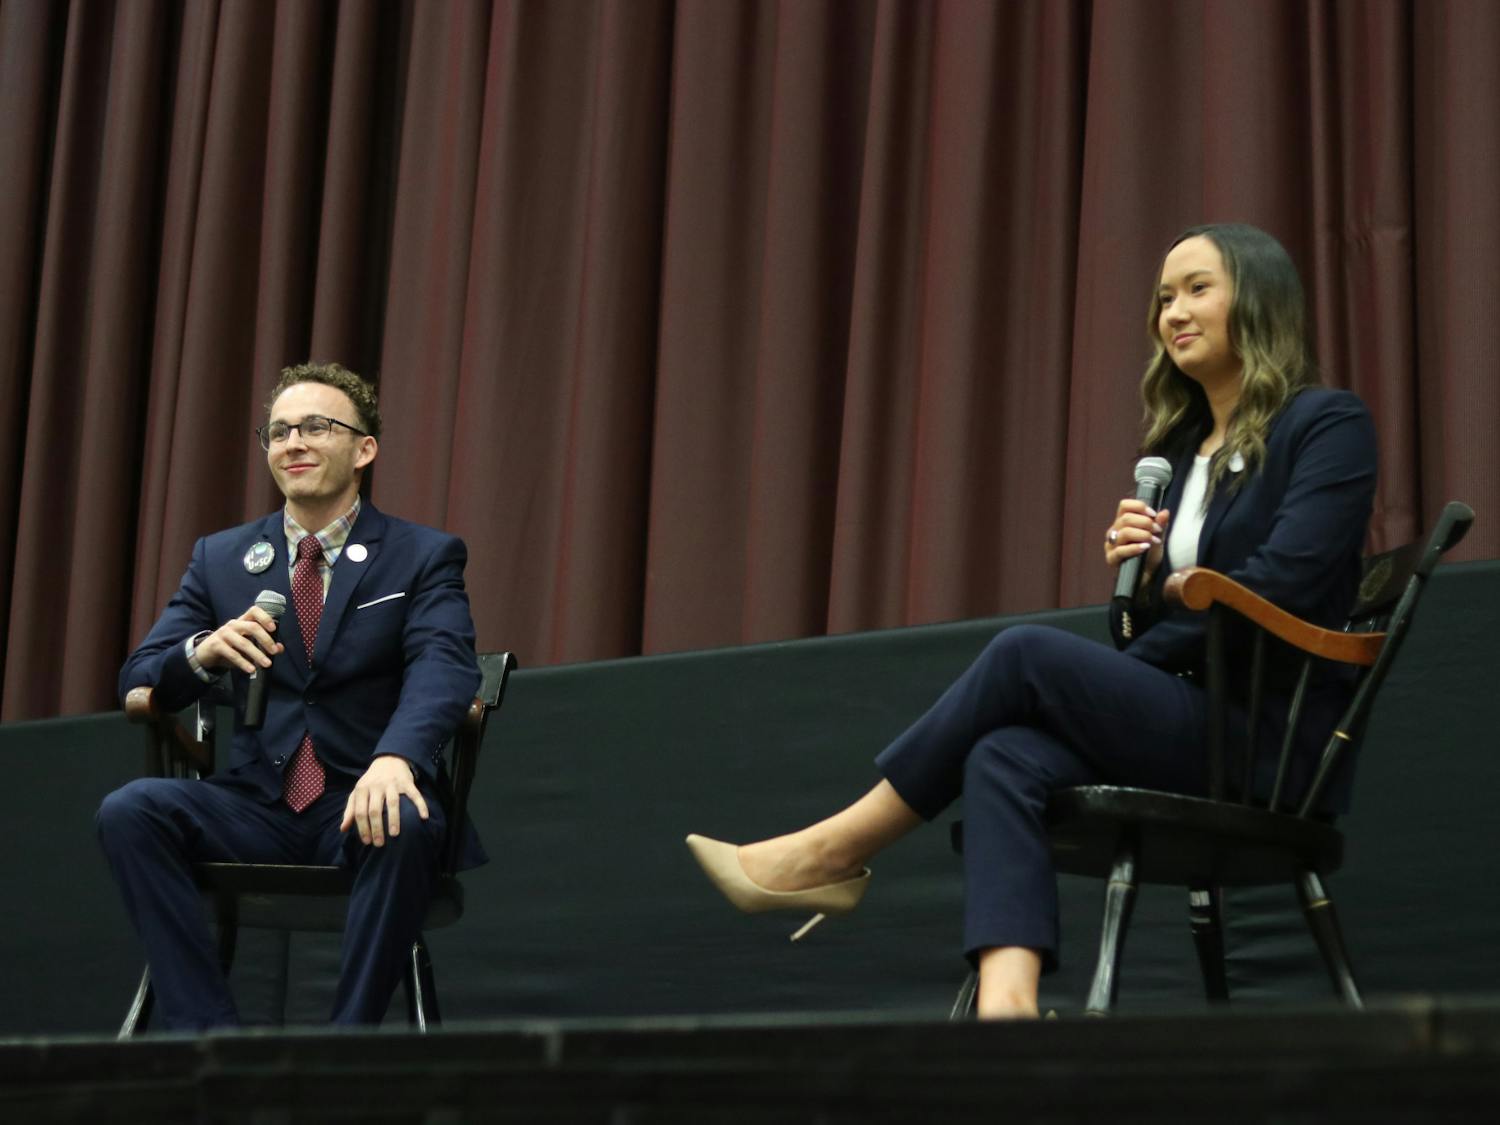 Student body presidential candidates third-year political science student Reilly Arford (left) and third-year public relations student Emily "Emmie" Thompson (right) on stage debating on Feb. 15, 2023. They are the only two presidential candidates this election season.&nbsp;